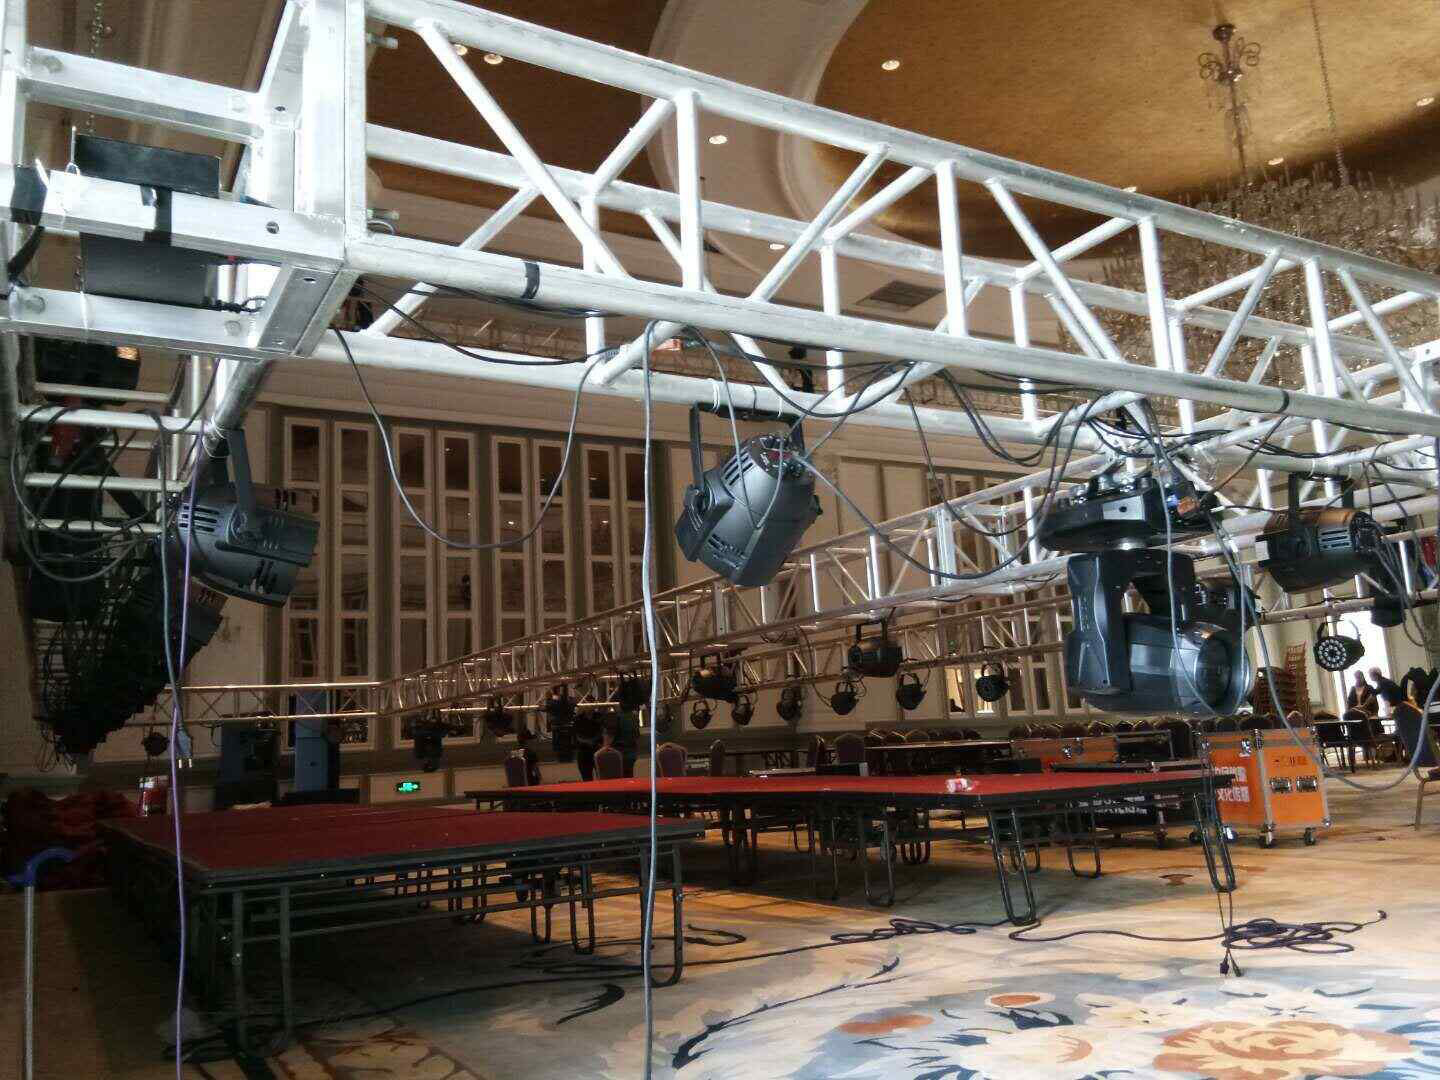 Four precautions for using electric hoists on stage